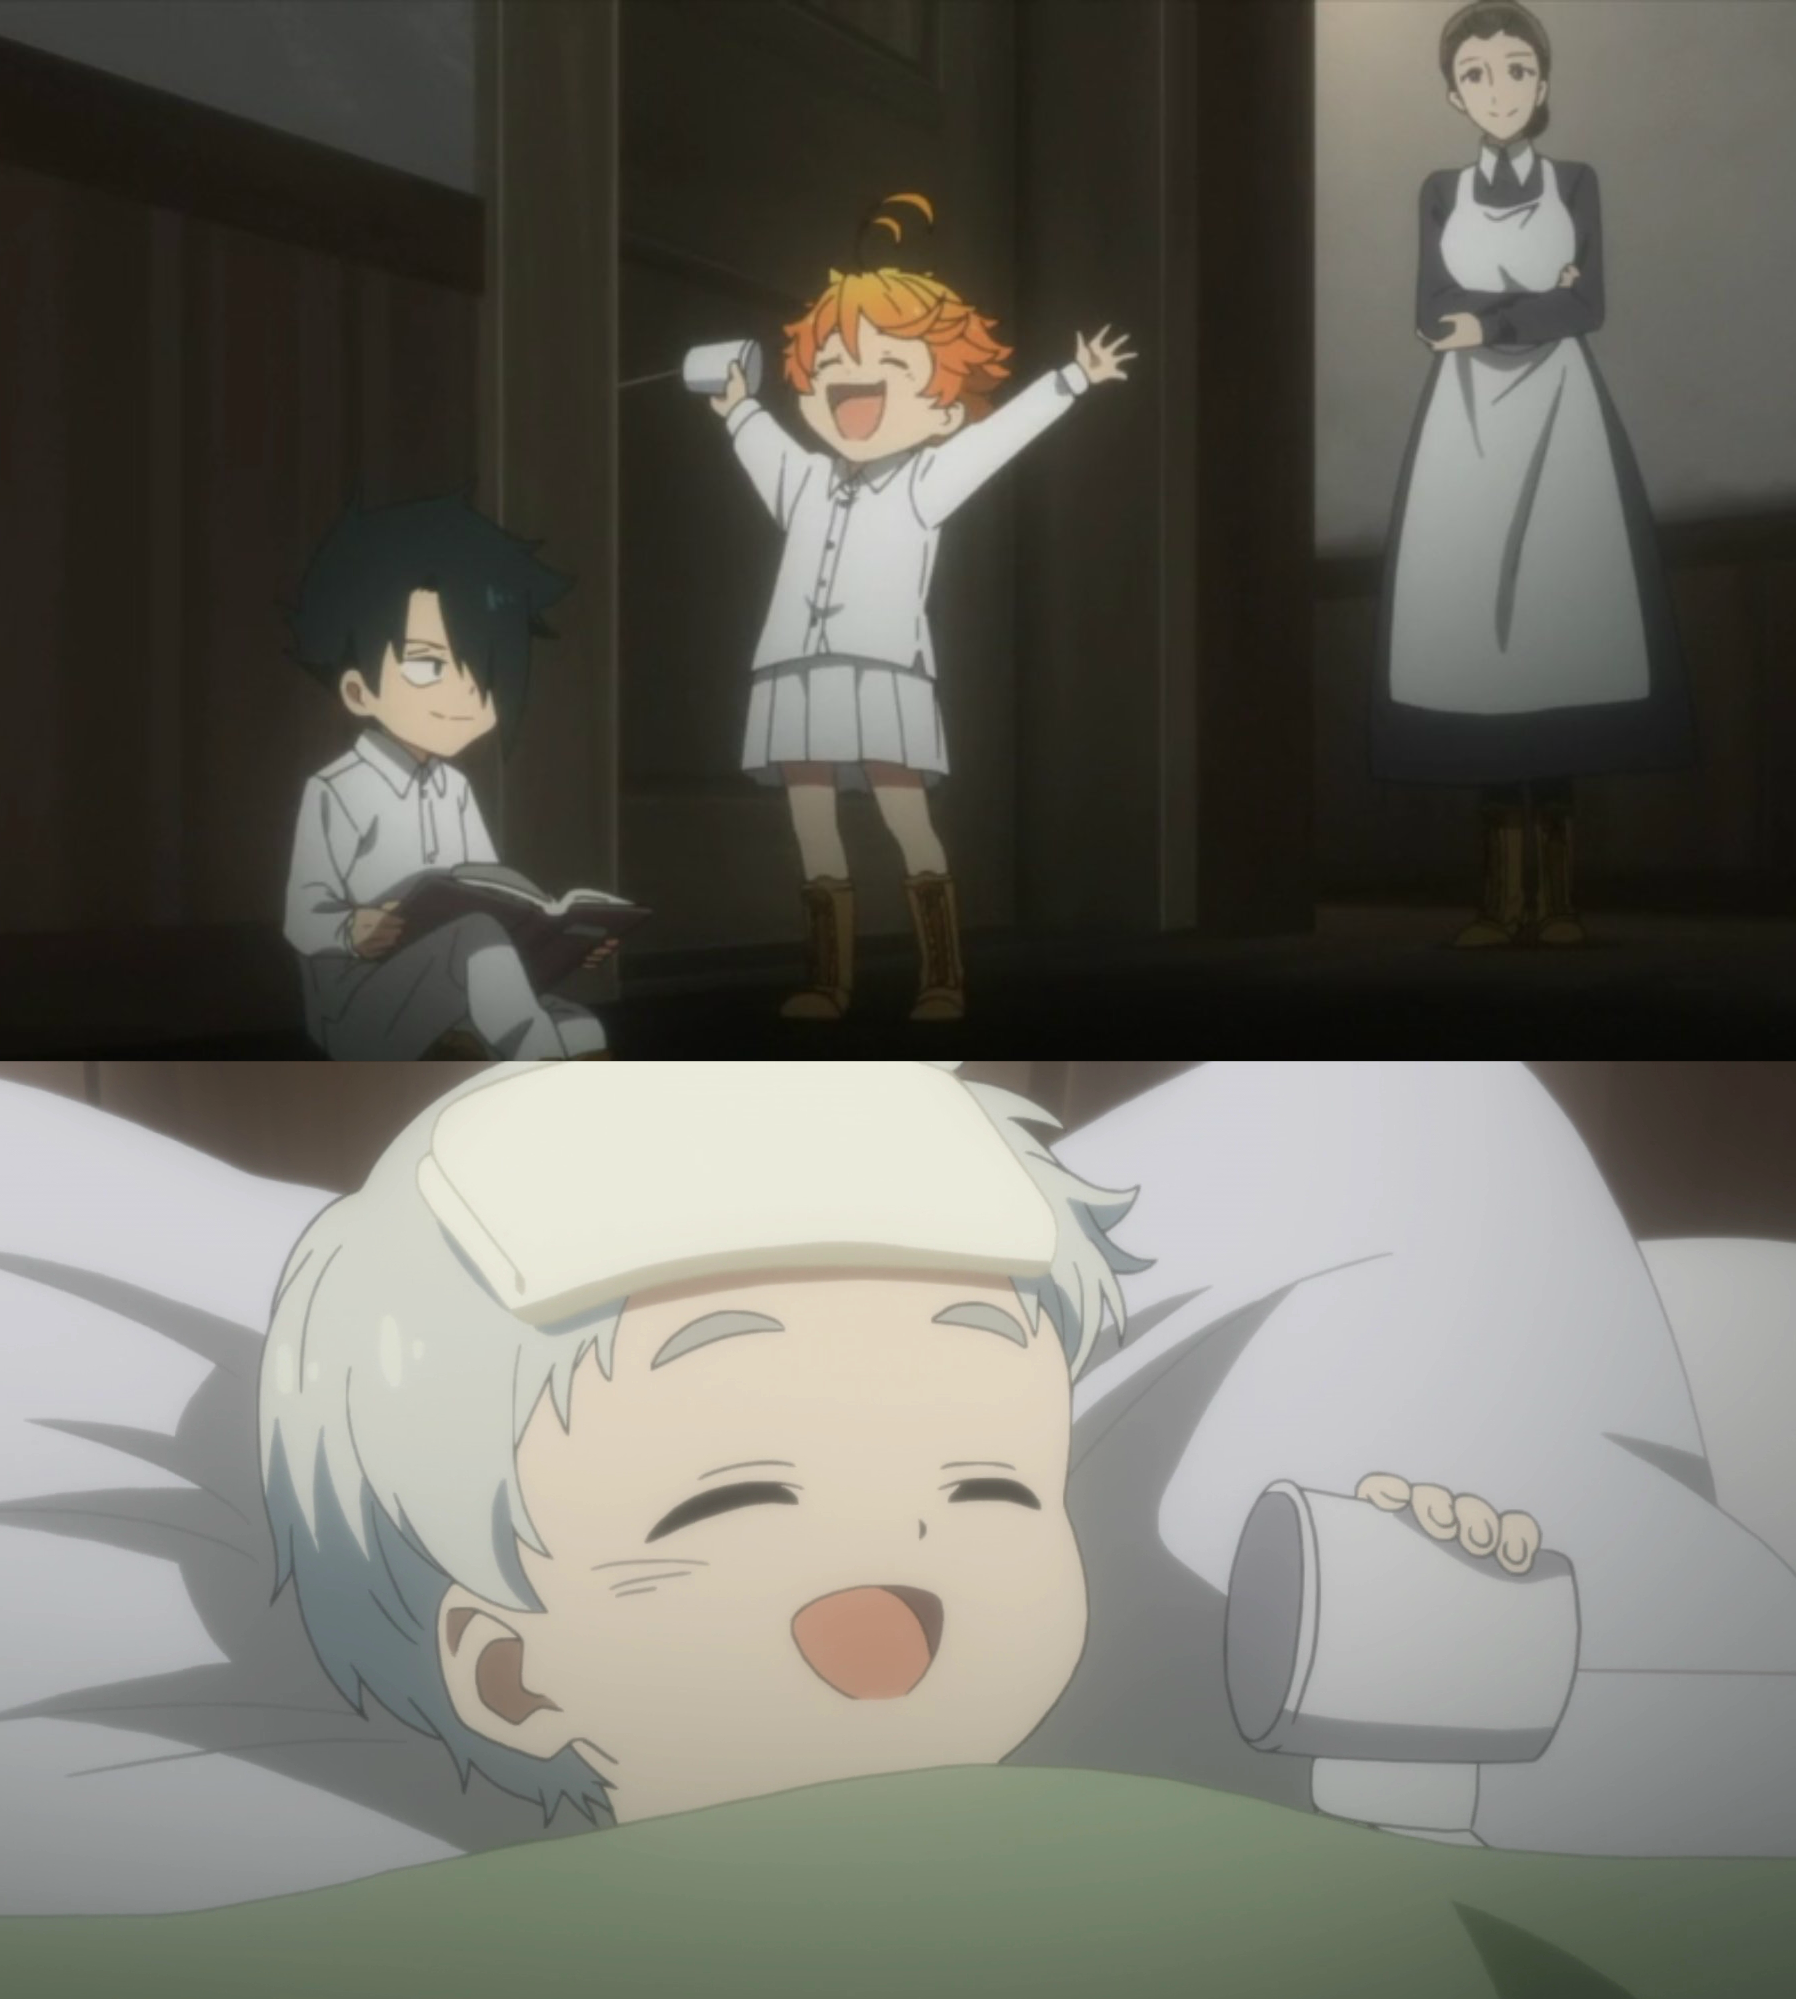 The Promised Neverland: 10 Things That Make No Sense About Emma